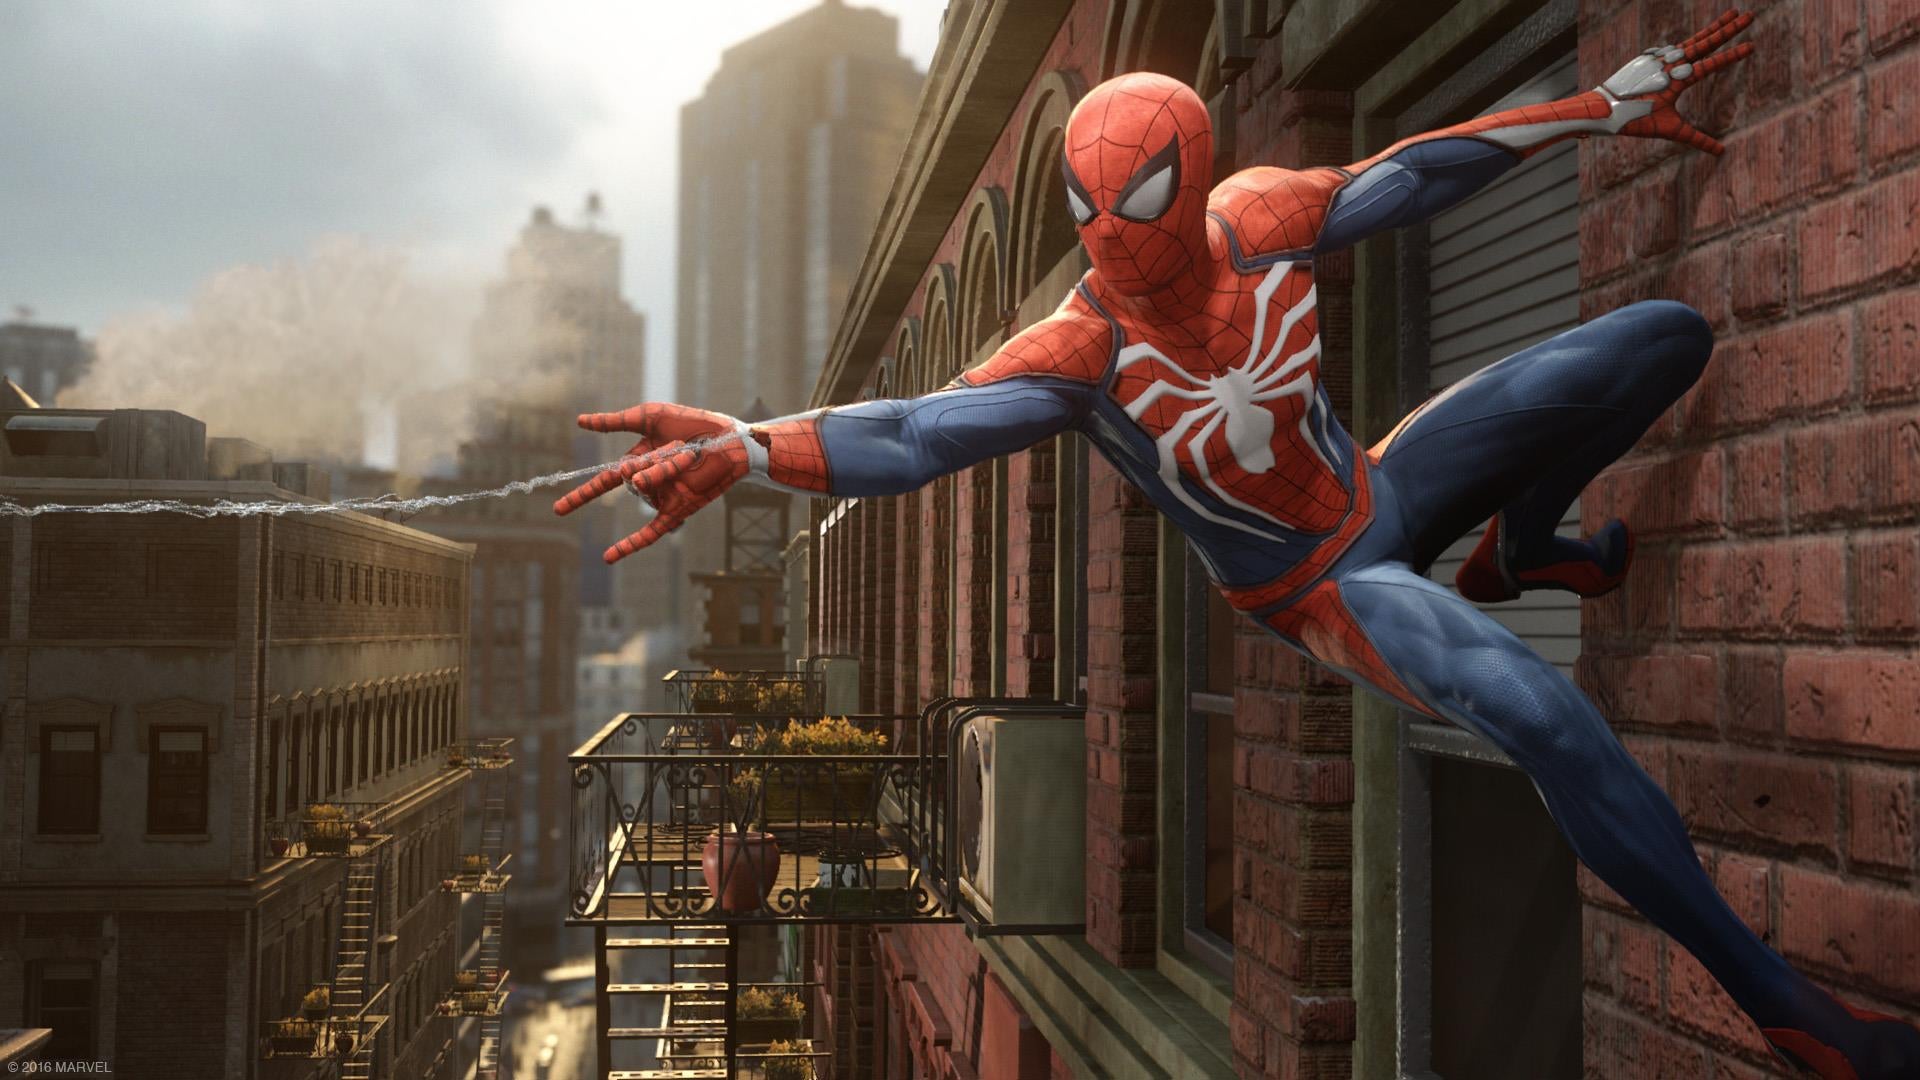 Image for Spider-Man PS4 has sold over 20 million units